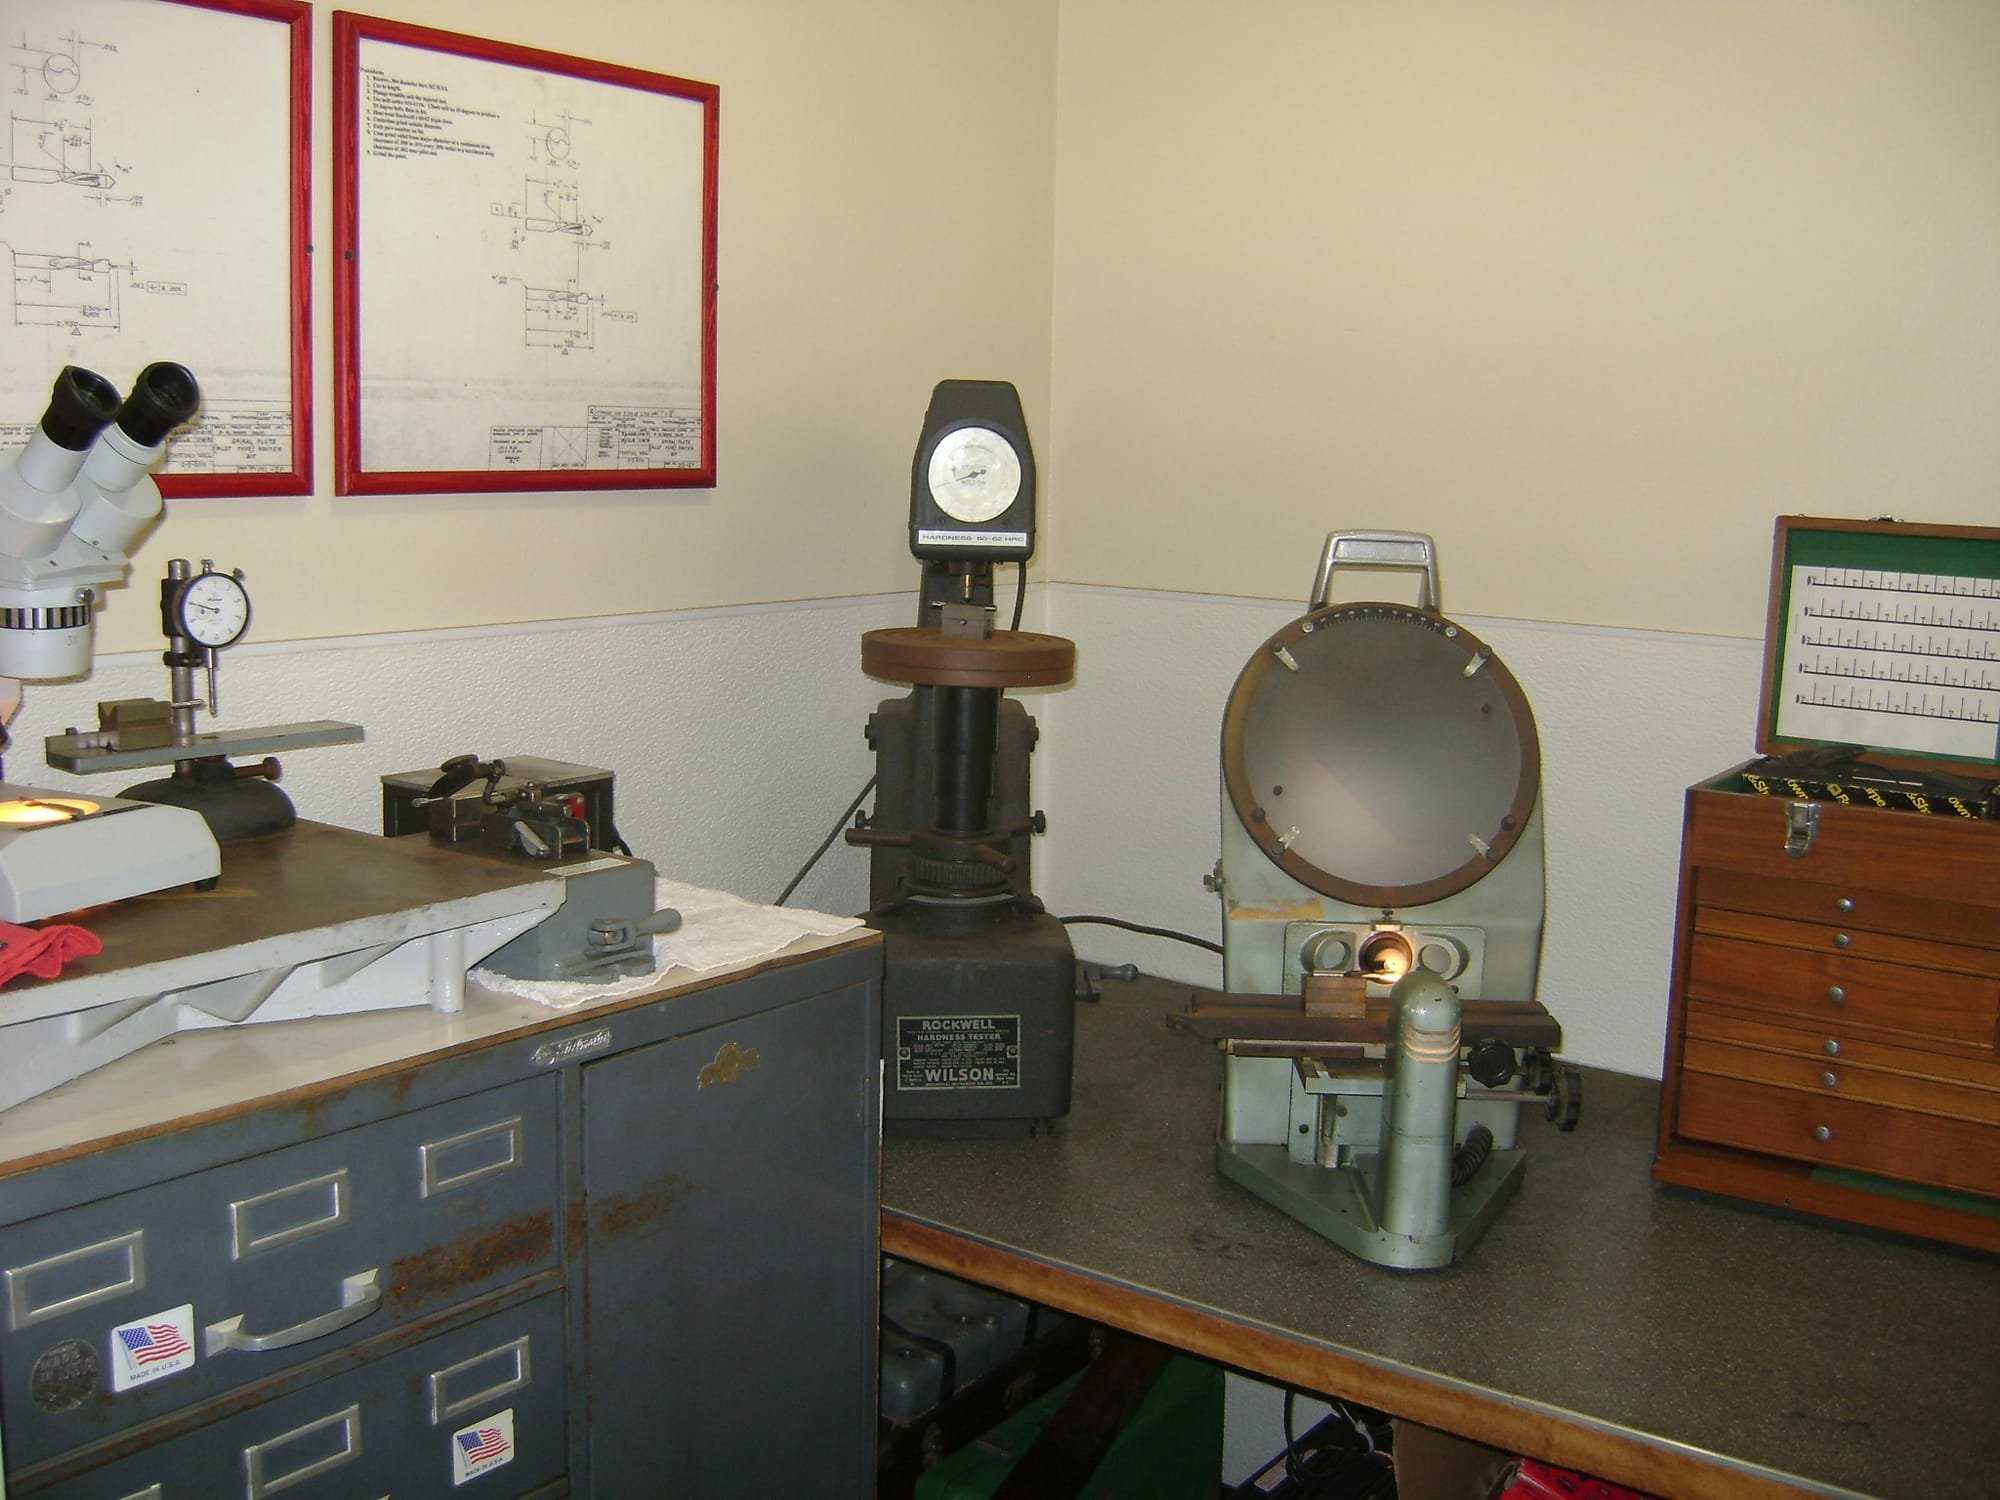 Inspection Room